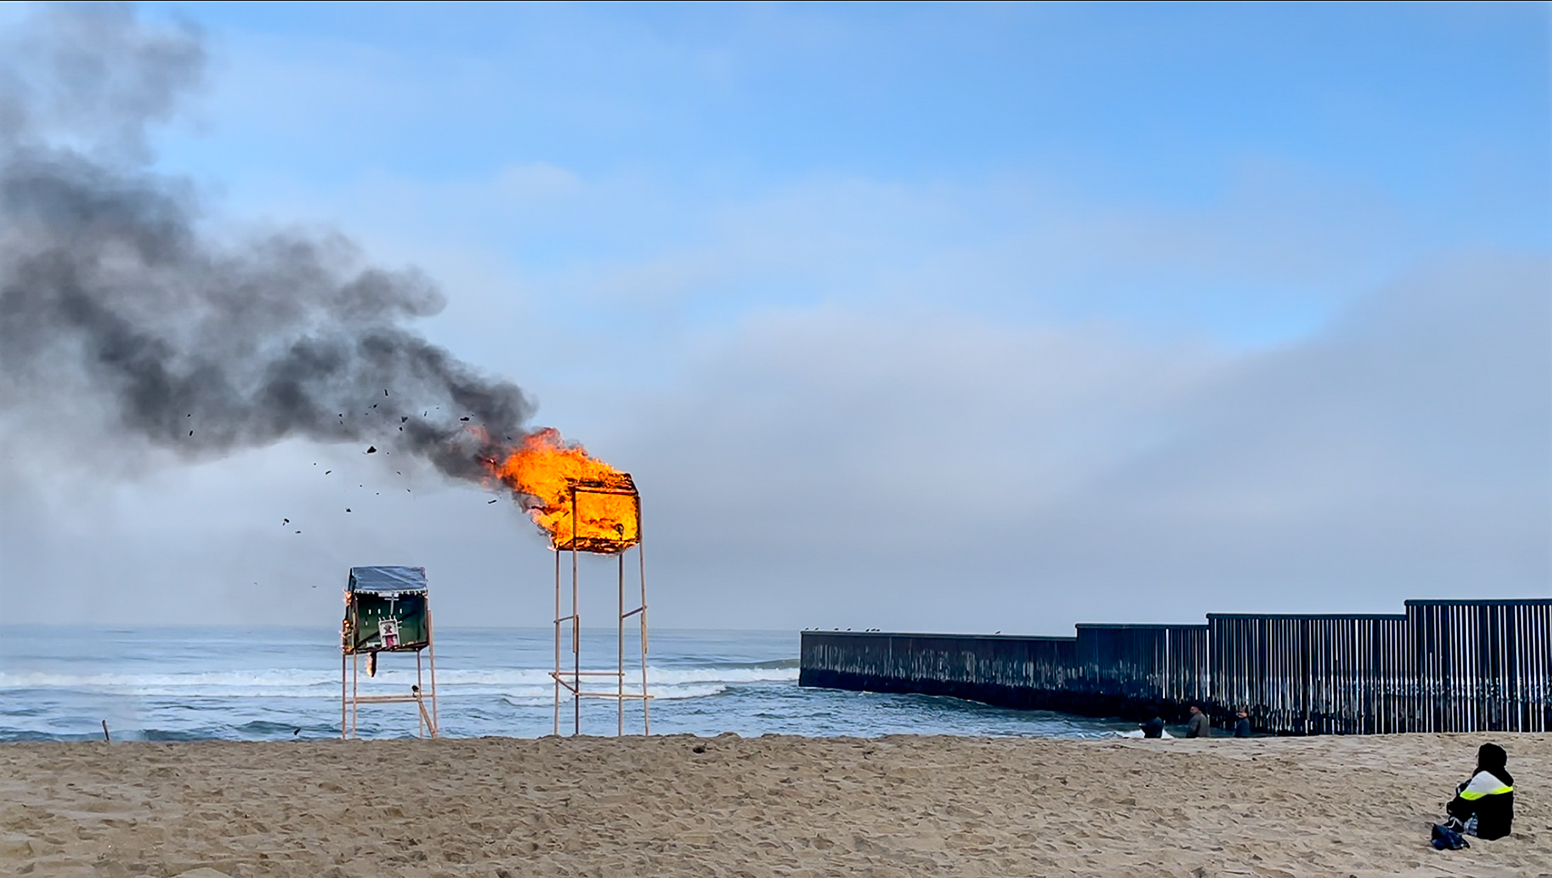 A person sits on a beach watching as a lifeguard stand burns.